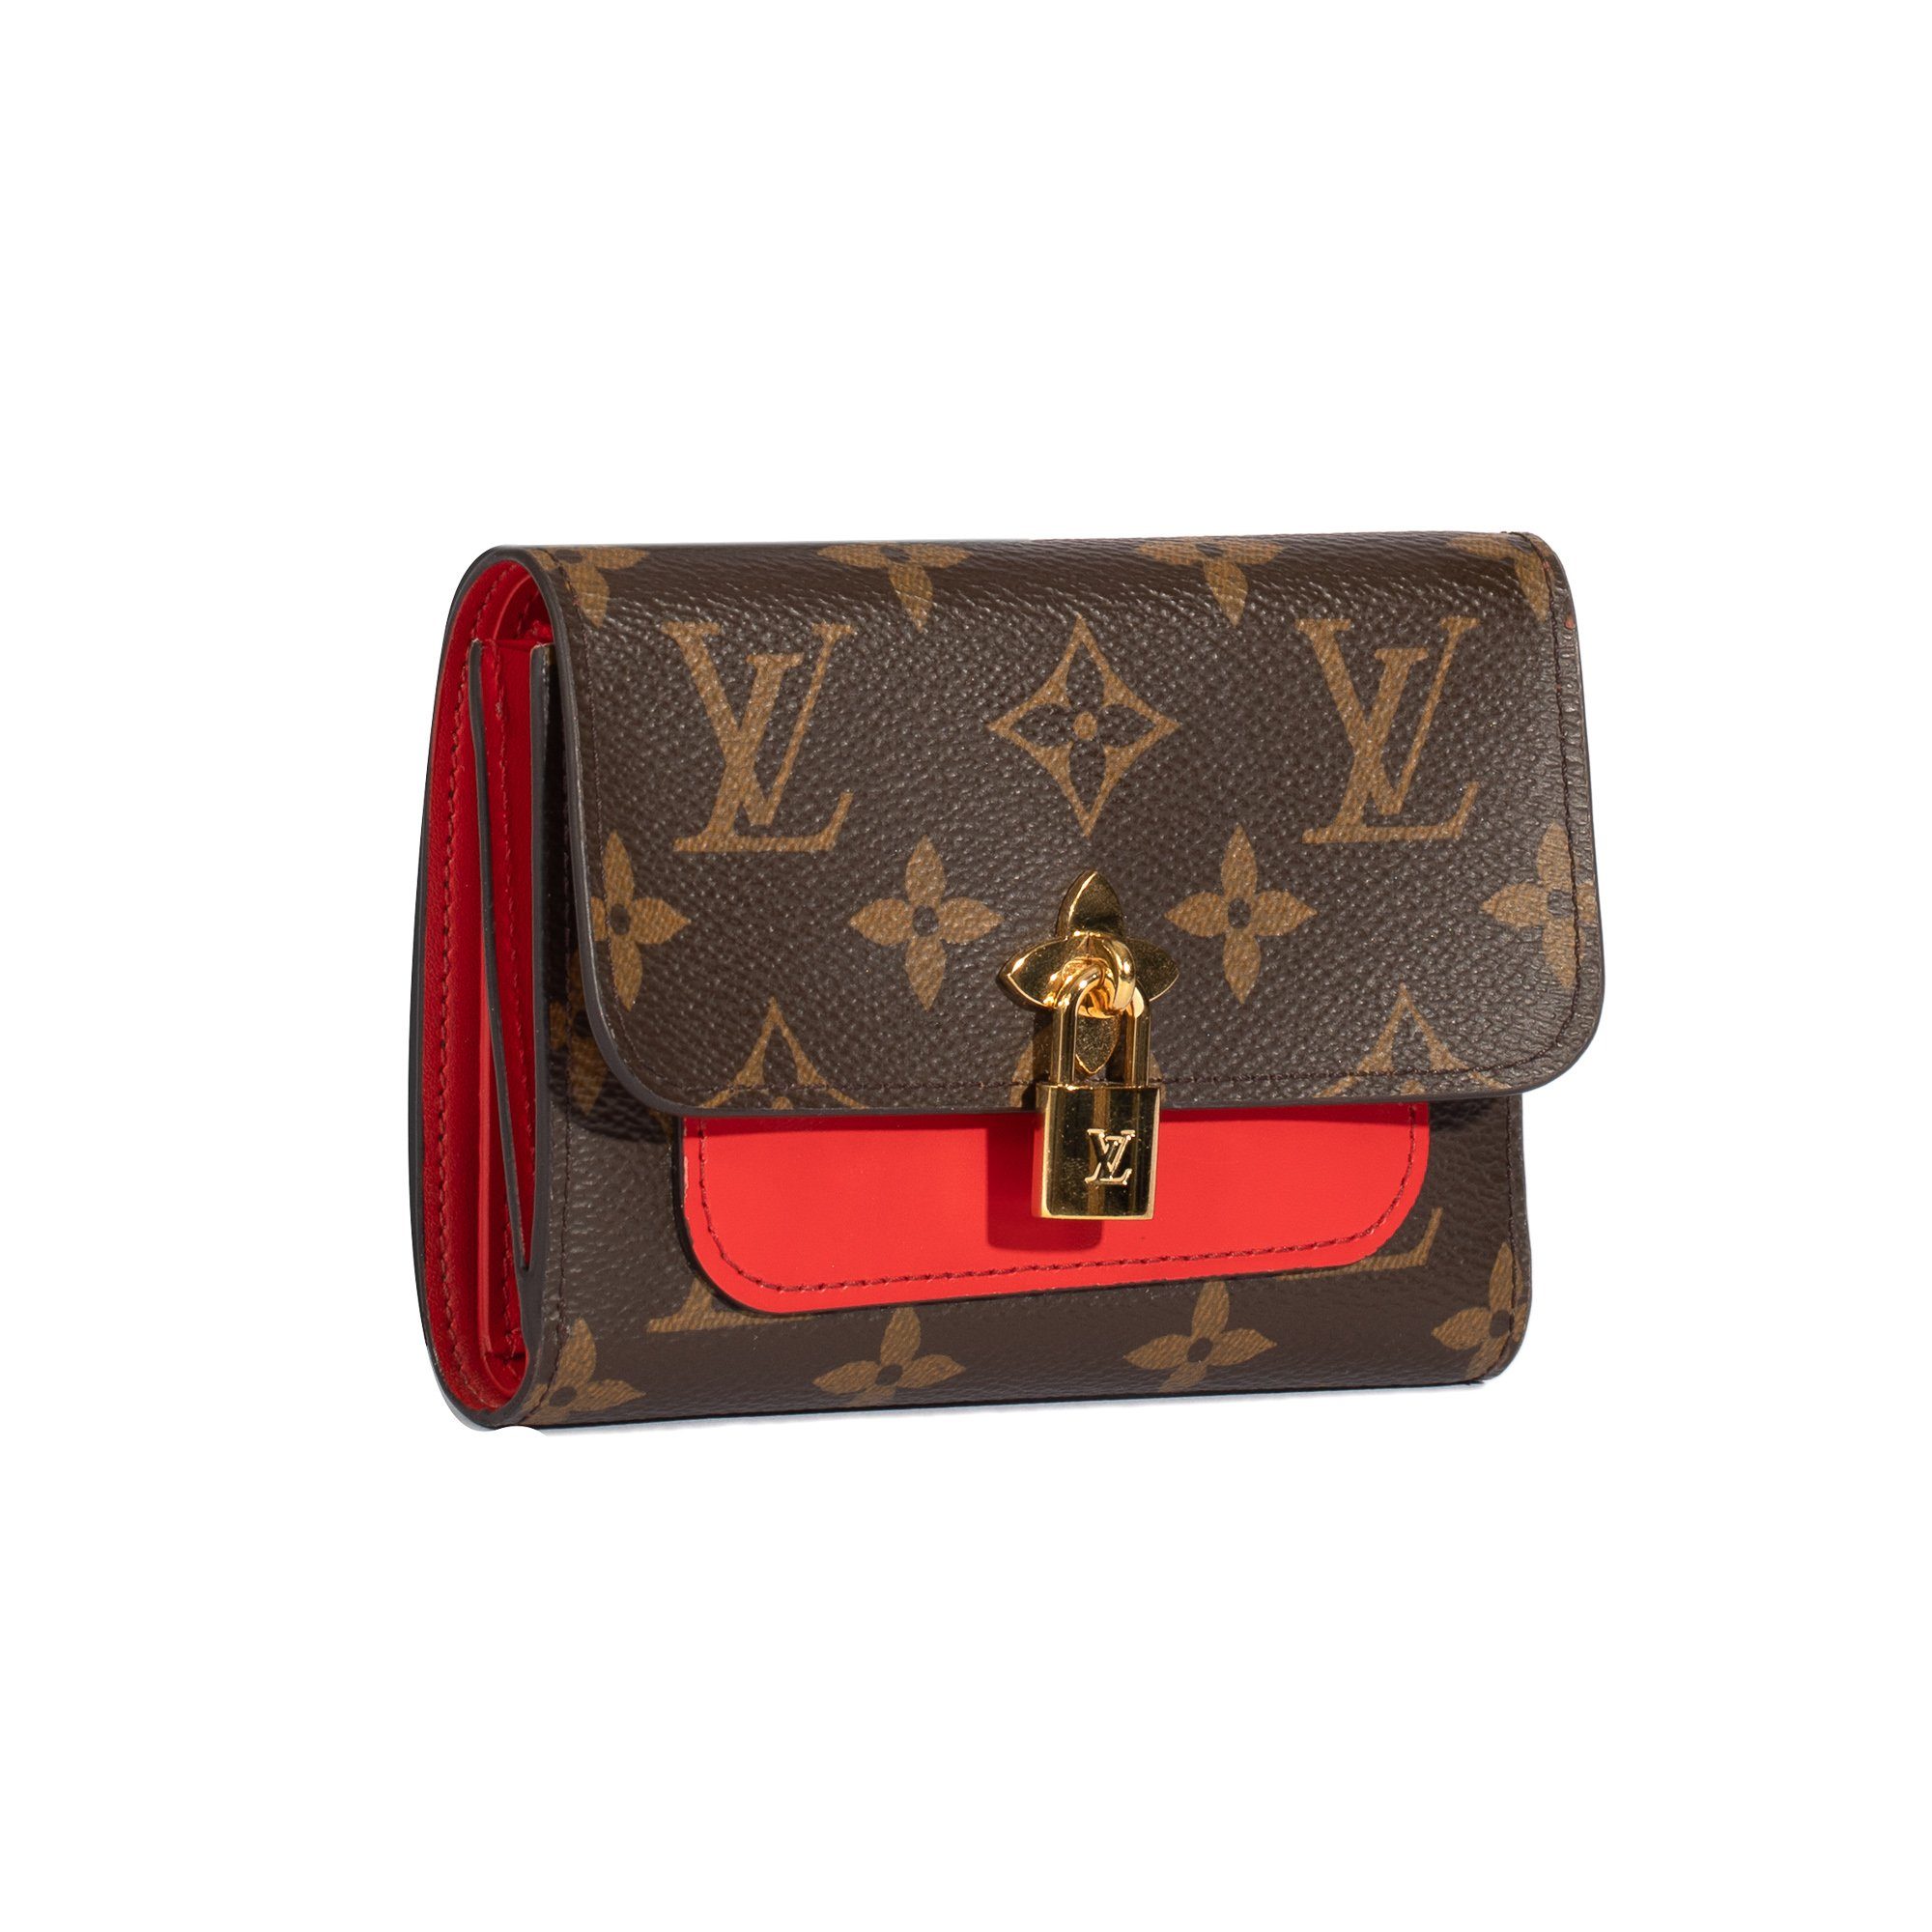 Louis Vuitton releases $39K airplane-themed purse, prompting